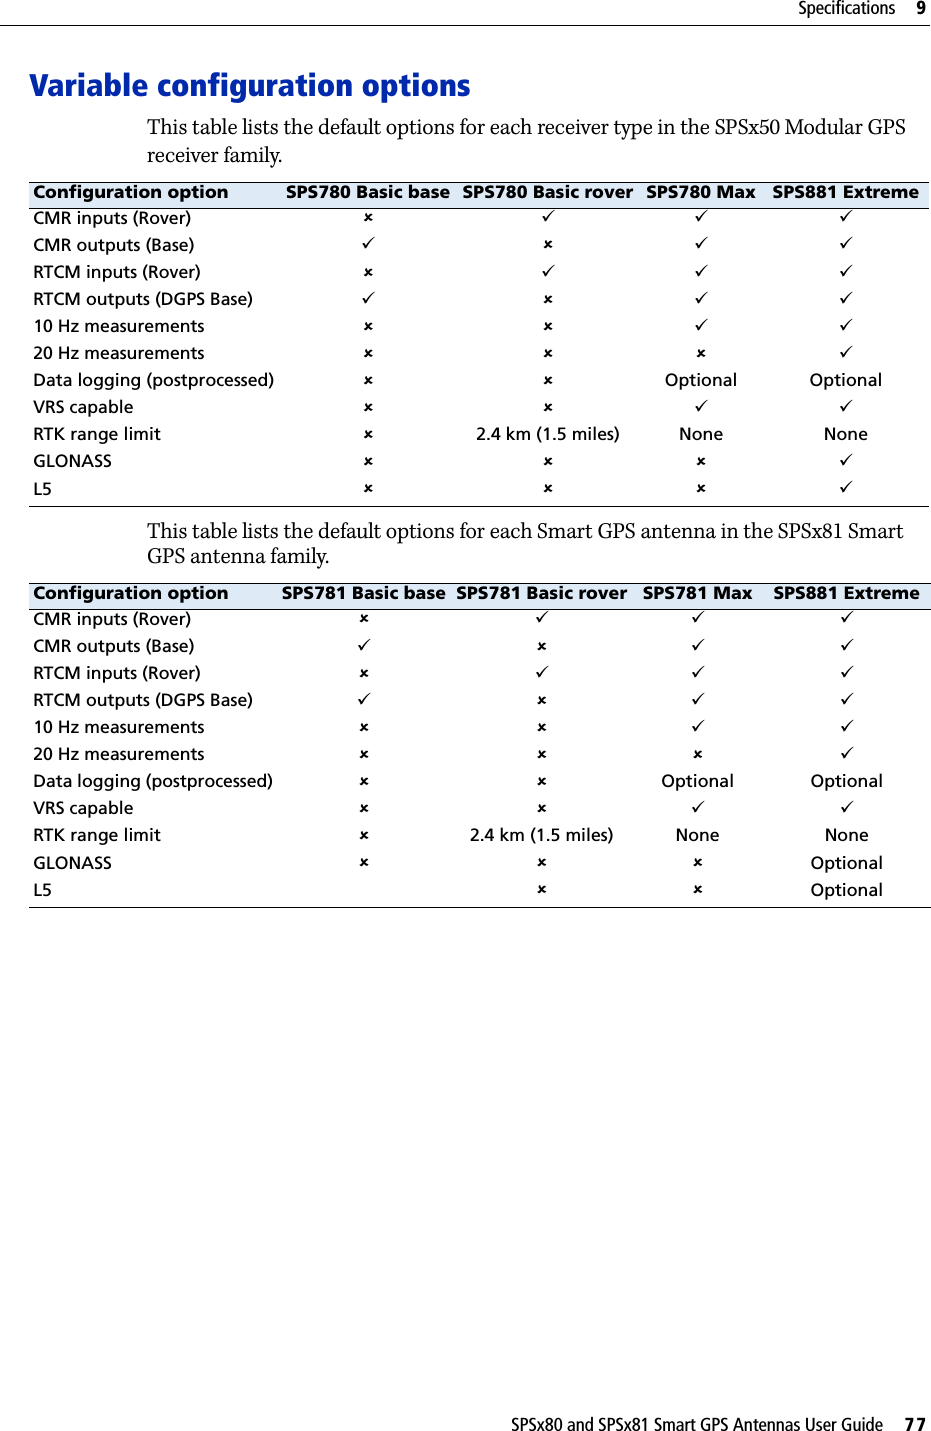 SPSx80 and SPSx81 Smart GPS Antennas User Guide     77Specifications     9Variable configuration optionsThis table lists the default options for each receiver type in the SPSx50 Modular GPS receiver family.This table lists the default options for each Smart GPS antenna in the SPSx81 Smart GPS antenna family.Configuration option SPS780 Basic base SPS780 Basic rover SPS780 Max SPS881 ExtremeCMR inputs (Rover) 8 9 9 9CMR outputs (Base) 9 8 9 9RTCM inputs (Rover) 8 9 9 9RTCM outputs (DGPS Base) 9 8 9 910 Hz measurements 8 8 9 920 Hz measurements 8 8 8 9Data logging (postprocessed) 8 8 Optional OptionalVRS capable 8 8 9 9RTK range limit 82.4 km (1.5 miles) None NoneGLONASS 8 8 8 9L5 8 8 8 9Configuration option SPS781 Basic base SPS781 Basic rover SPS781 Max SPS881 ExtremeCMR inputs (Rover) 8 9 9 9CMR outputs (Base) 9 8 9 9RTCM inputs (Rover) 8 9 9 9RTCM outputs (DGPS Base) 9 8 9 910 Hz measurements 8 8 9 920 Hz measurements 8 8 8 9Data logging (postprocessed) 8 8 Optional OptionalVRS capable 8 8 9 9RTK range limit 82.4 km (1.5 miles) None NoneGLONASS 8 8 8 OptionalL5 8 8 Optional